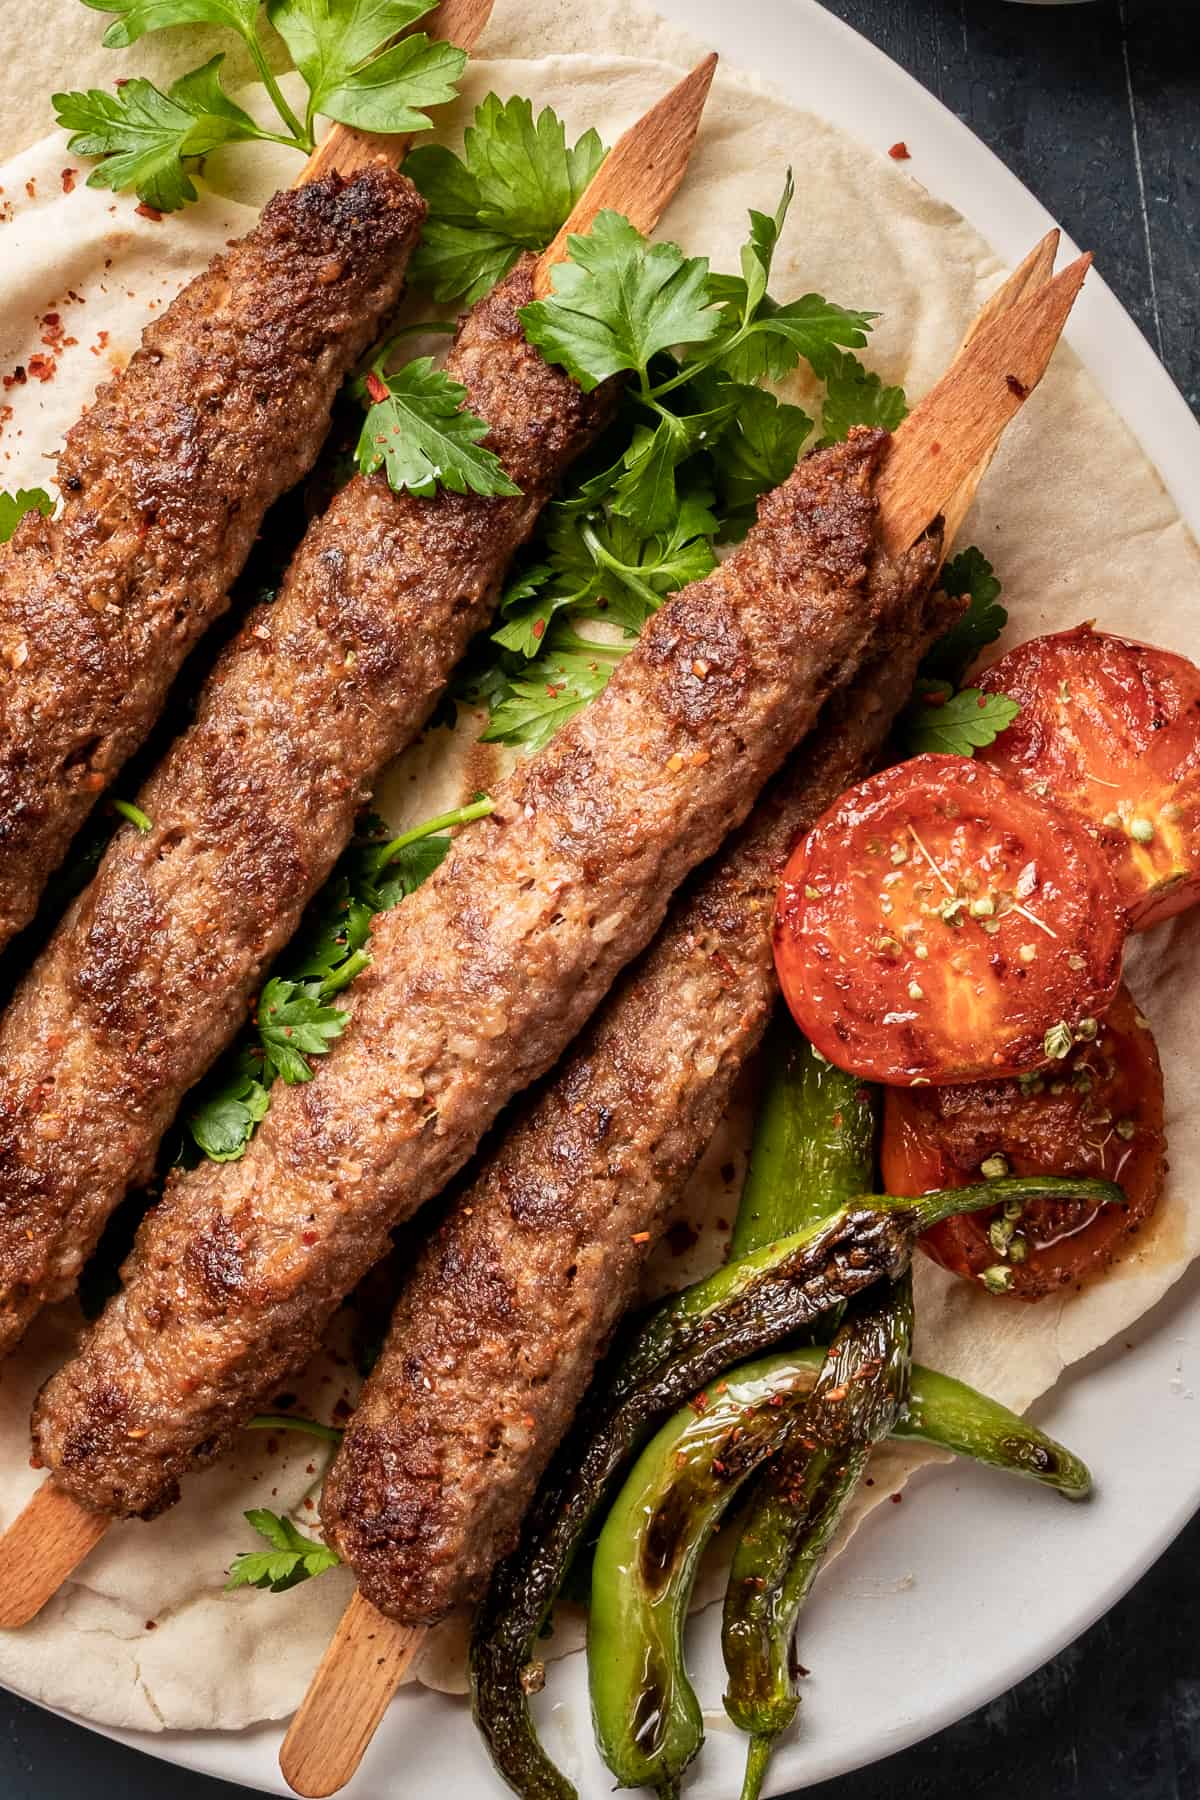 Adana kebabs on wooden skewers served on a flatbread, garnished with grilled tomatoes and peppers.